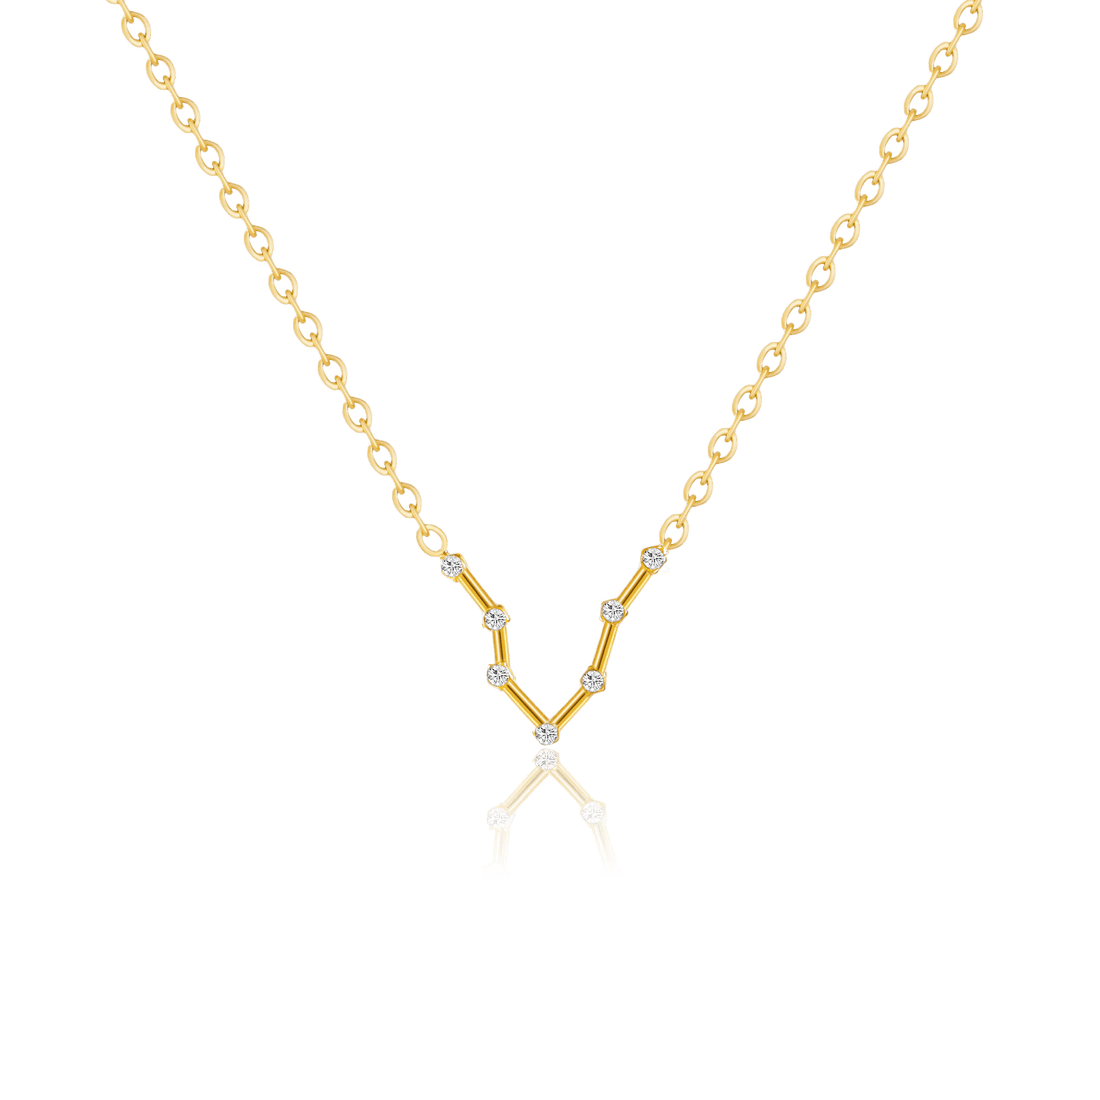 bianco rosso Necklaces Aquarius Zircon Gold Necklace cyprus greece jewelry gift free shipping europe worldwide